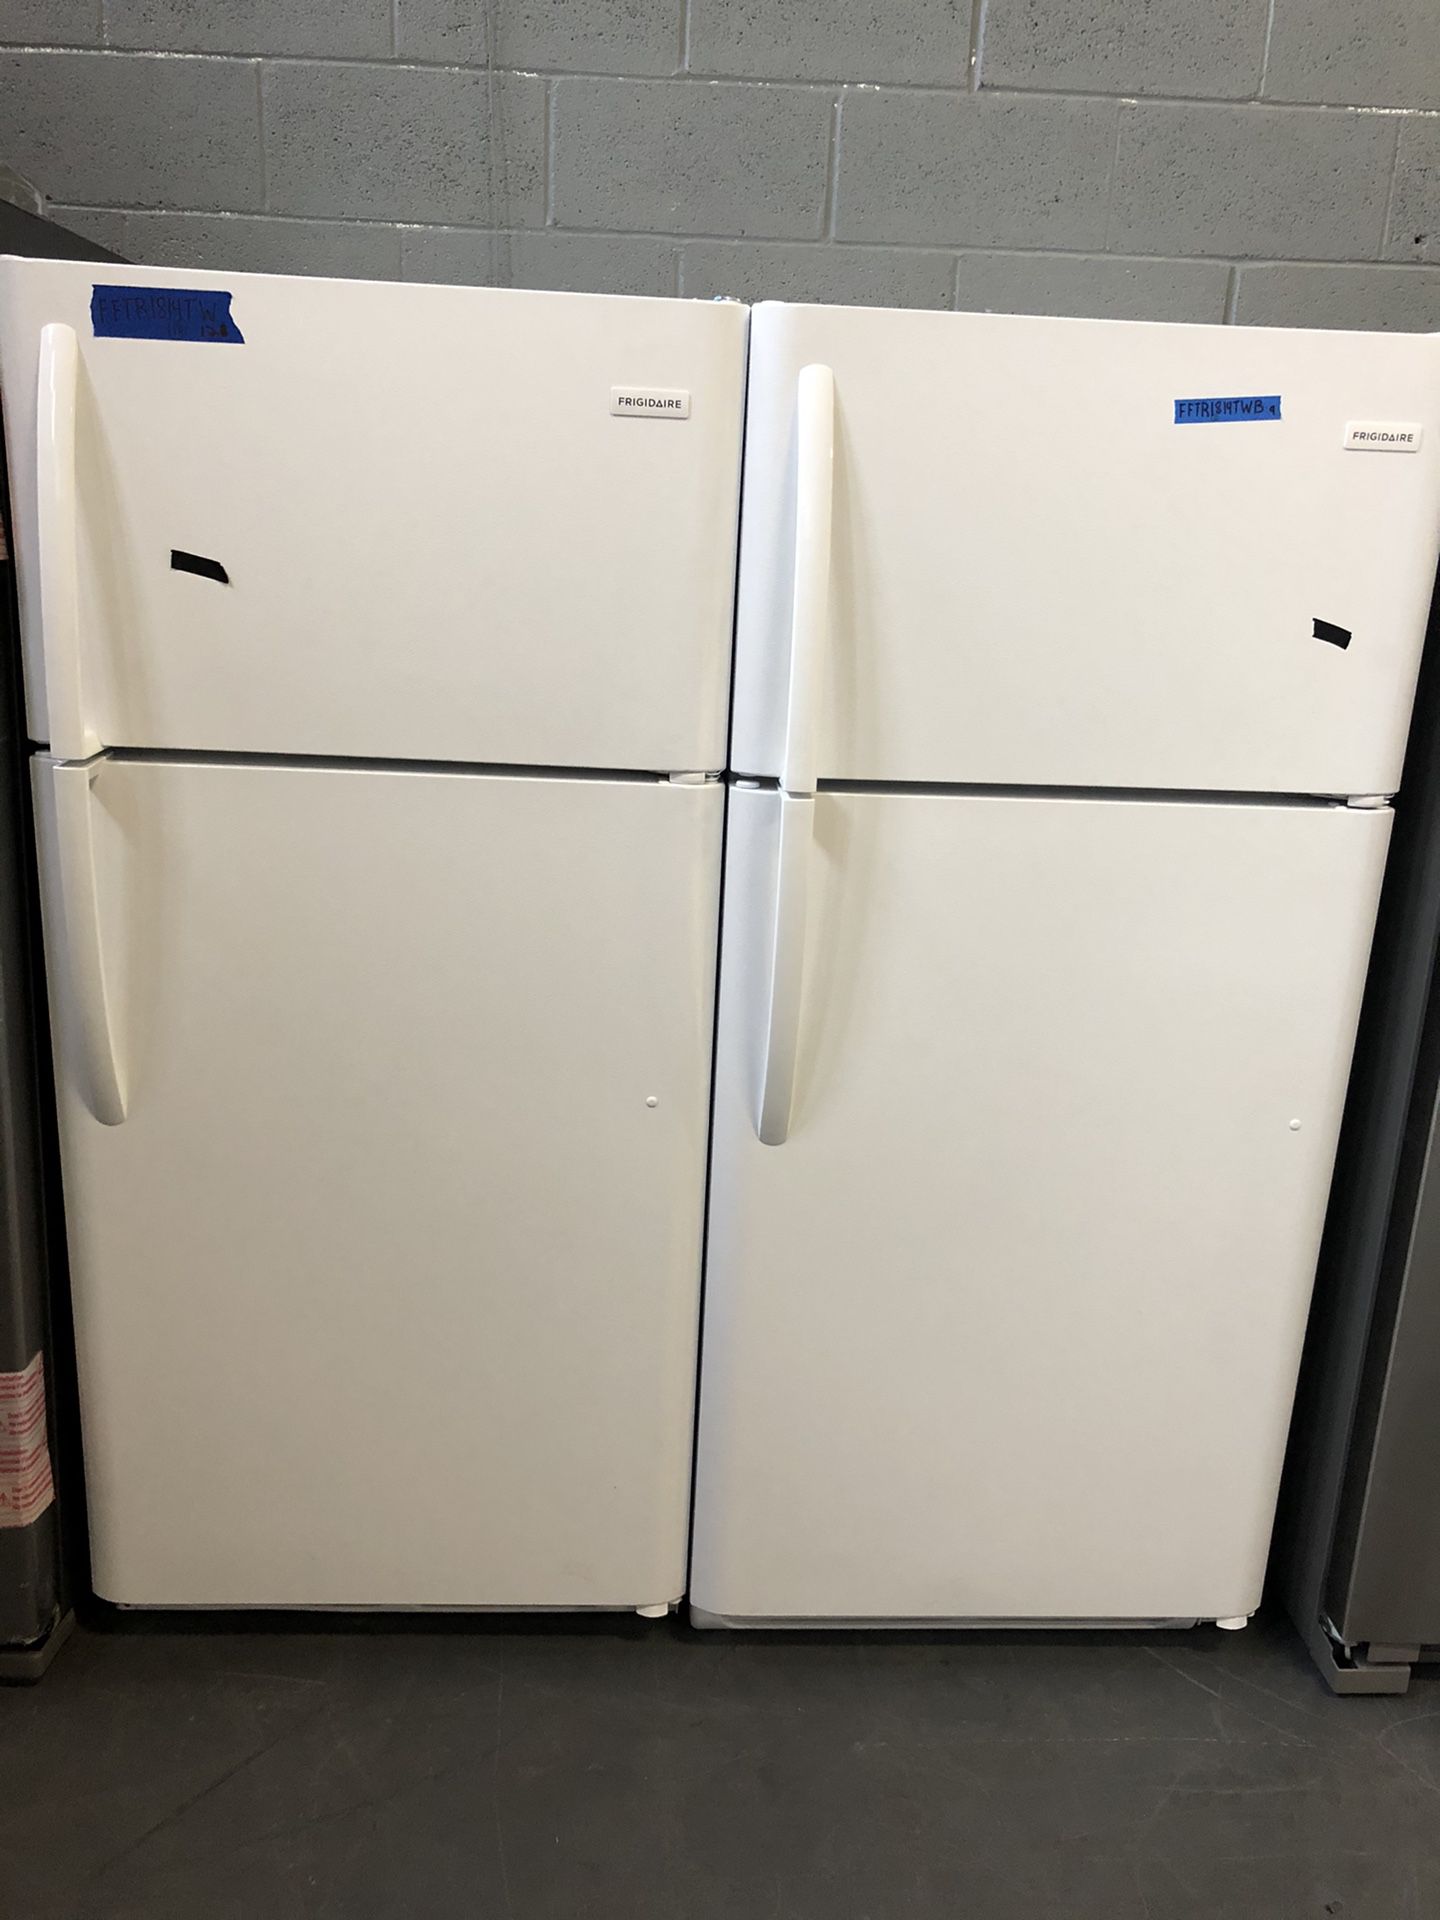 New 30by68 Frigidaire top and bottom. Fridge with warranty